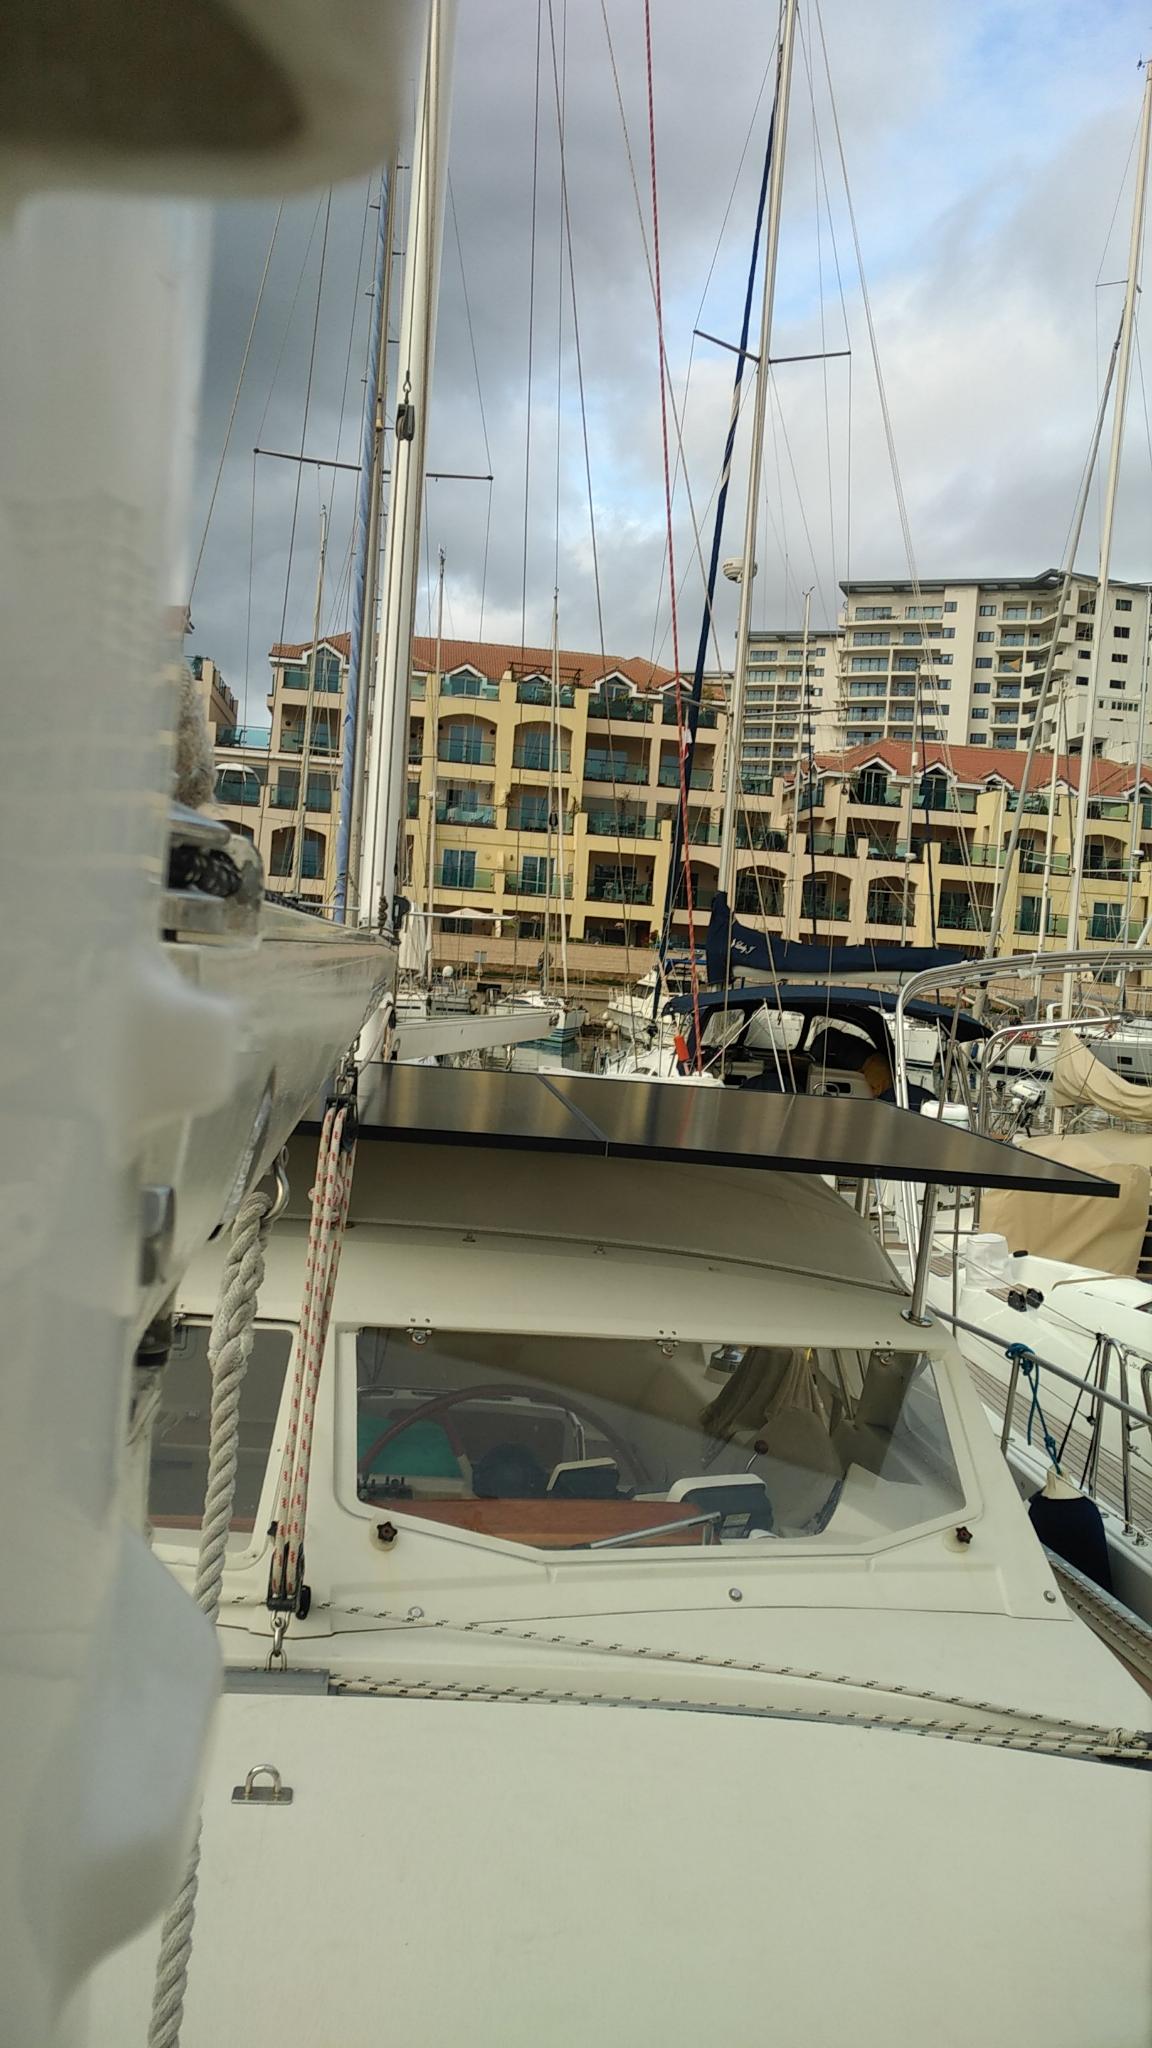 The latest news from sailing yacht Malaka Queen! images/2022/update/3.jpg